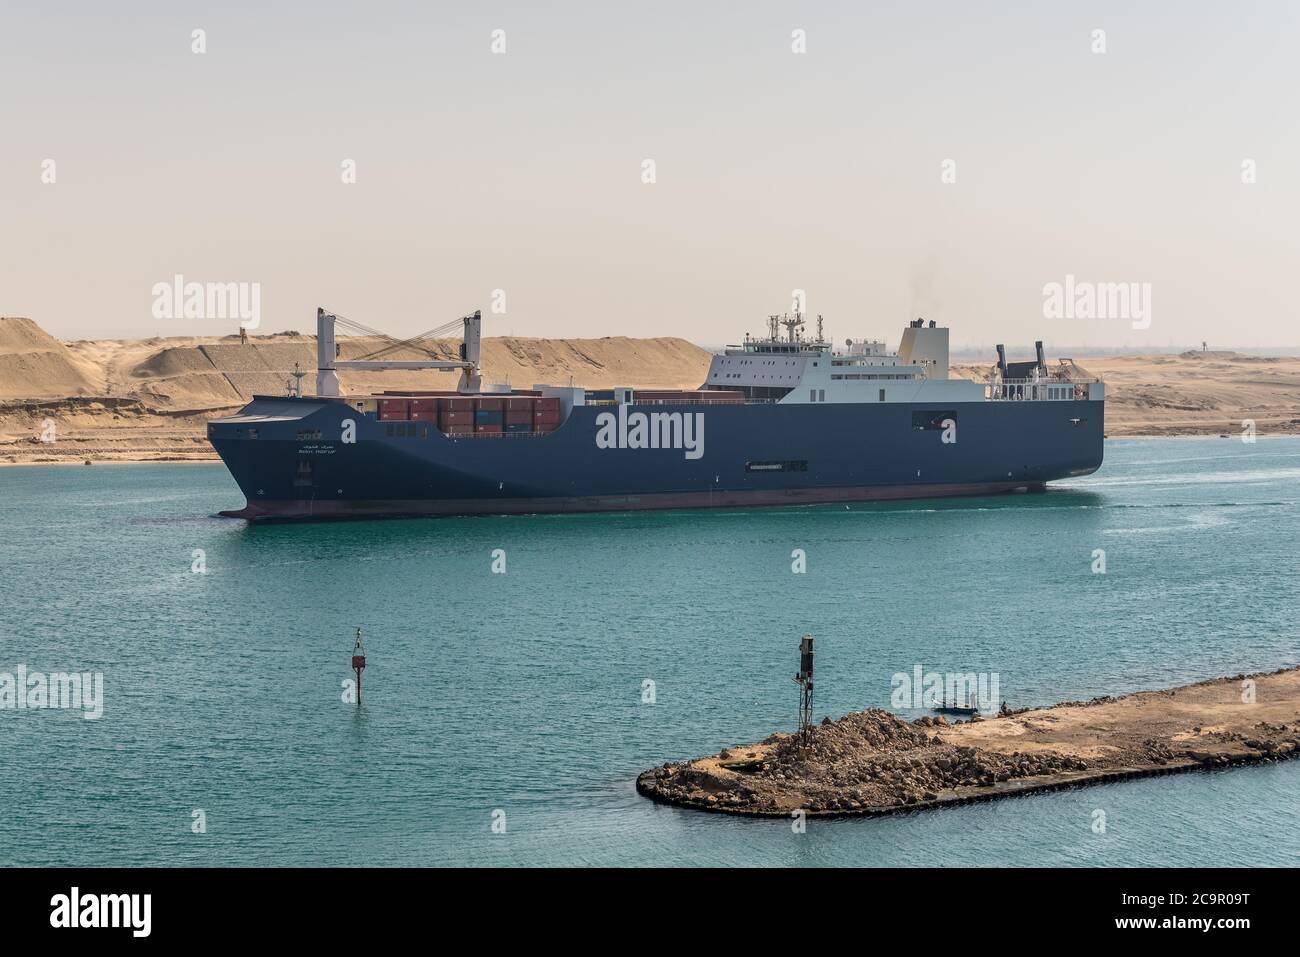 Suez, Egypt - November 14, 2019: Ro-Ro Cargo vessel BAHRI HOFUF passing Suez Canal in Egypt. The Suez Canal is an artificial sea-level waterway, conne Stock Photo